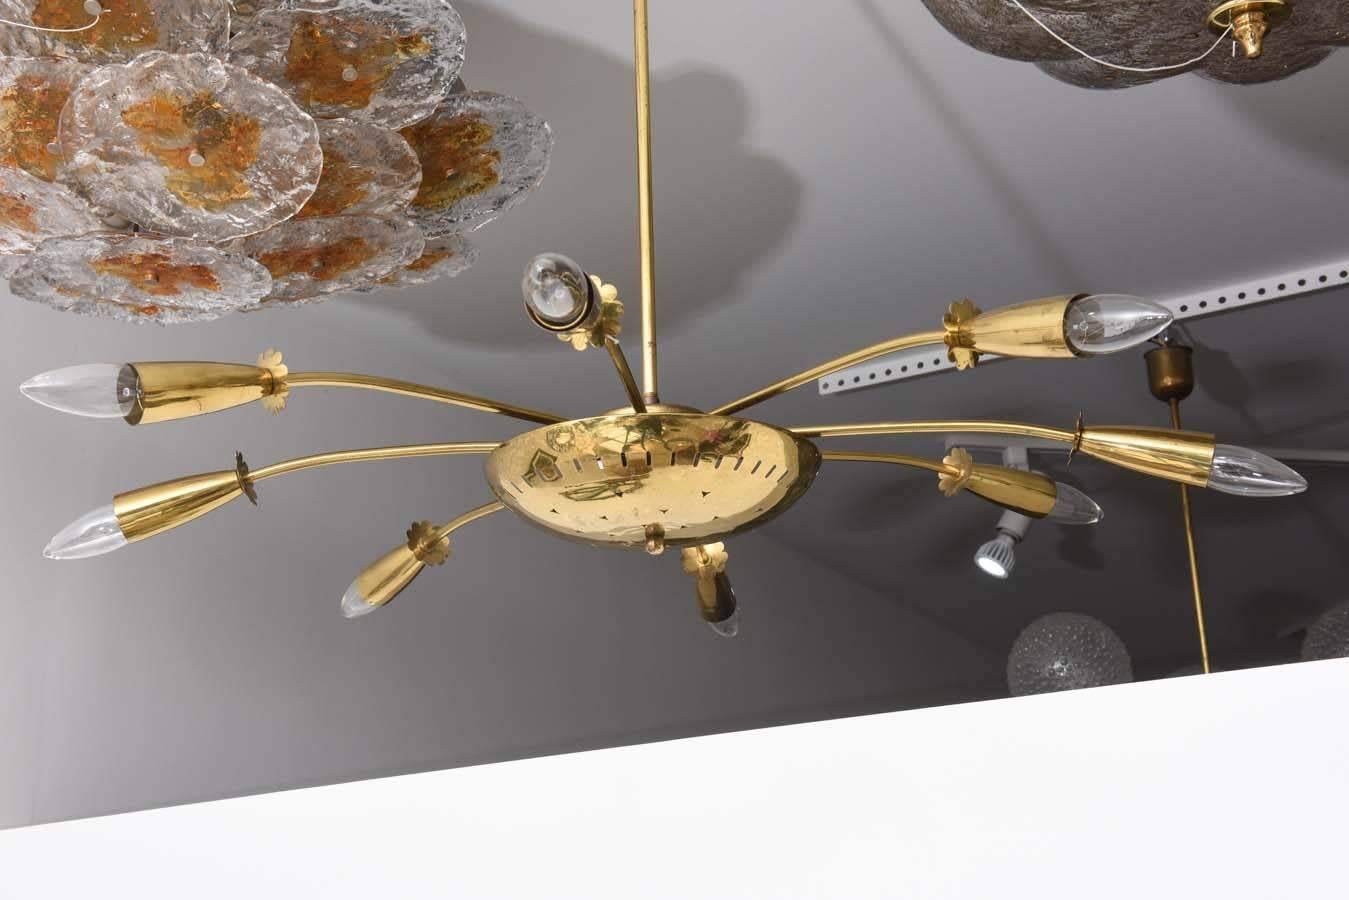 This cosmic inspired chandelier was created in the 1950s in the style of the iconic Italian firm of Stilnovo. The eight-arm design is very representative of a bursting star or comet.

Note: This piece requires eight European based candelabra